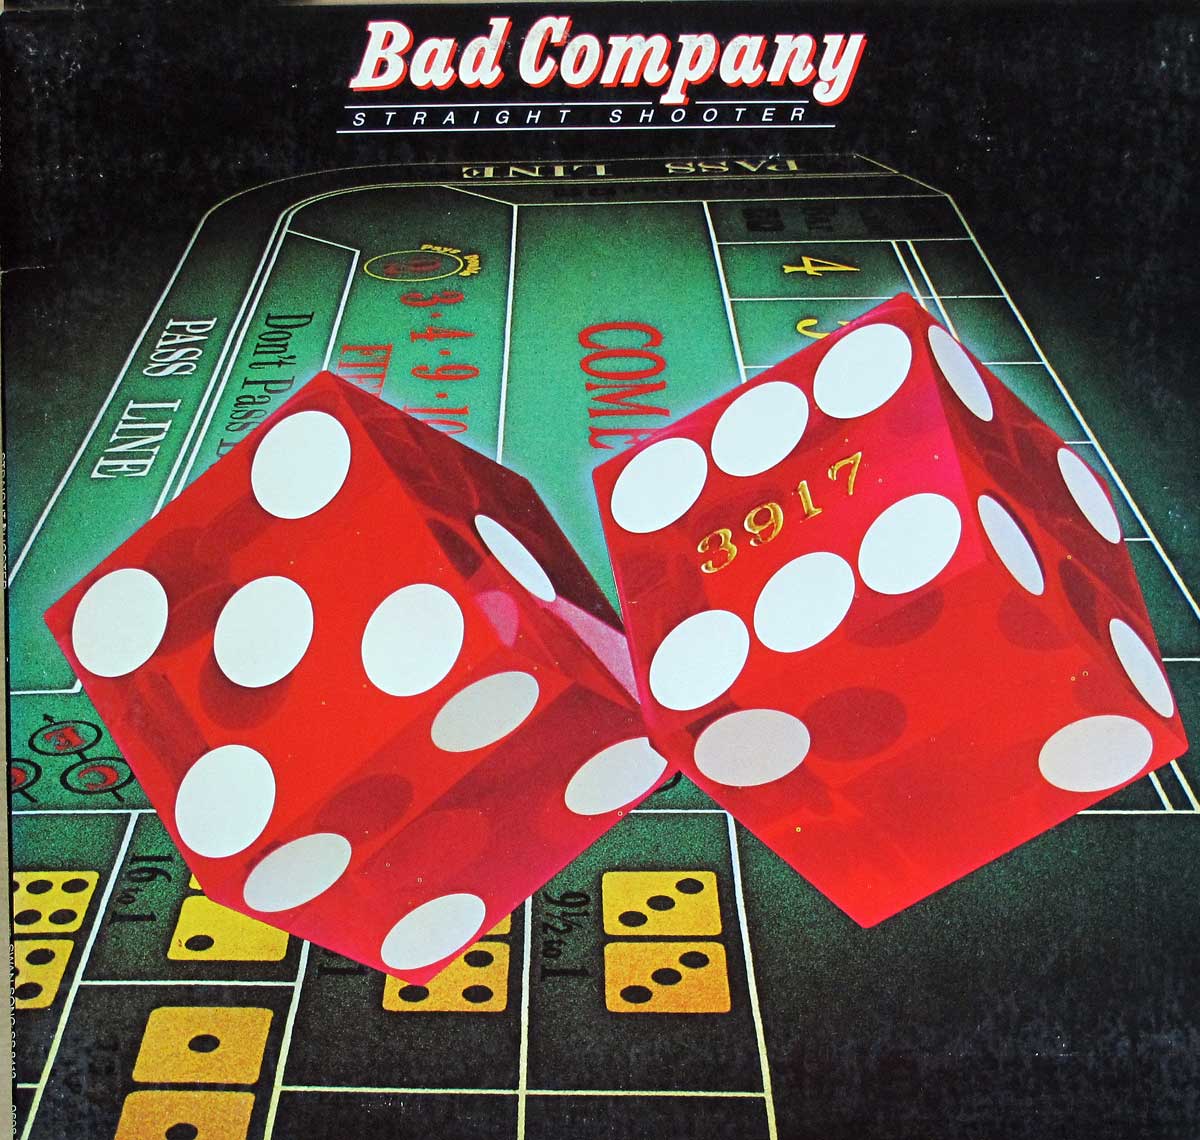 large hires photo of Album Front Cover  "BAD COMPANY - Straight Shooter (USA)"